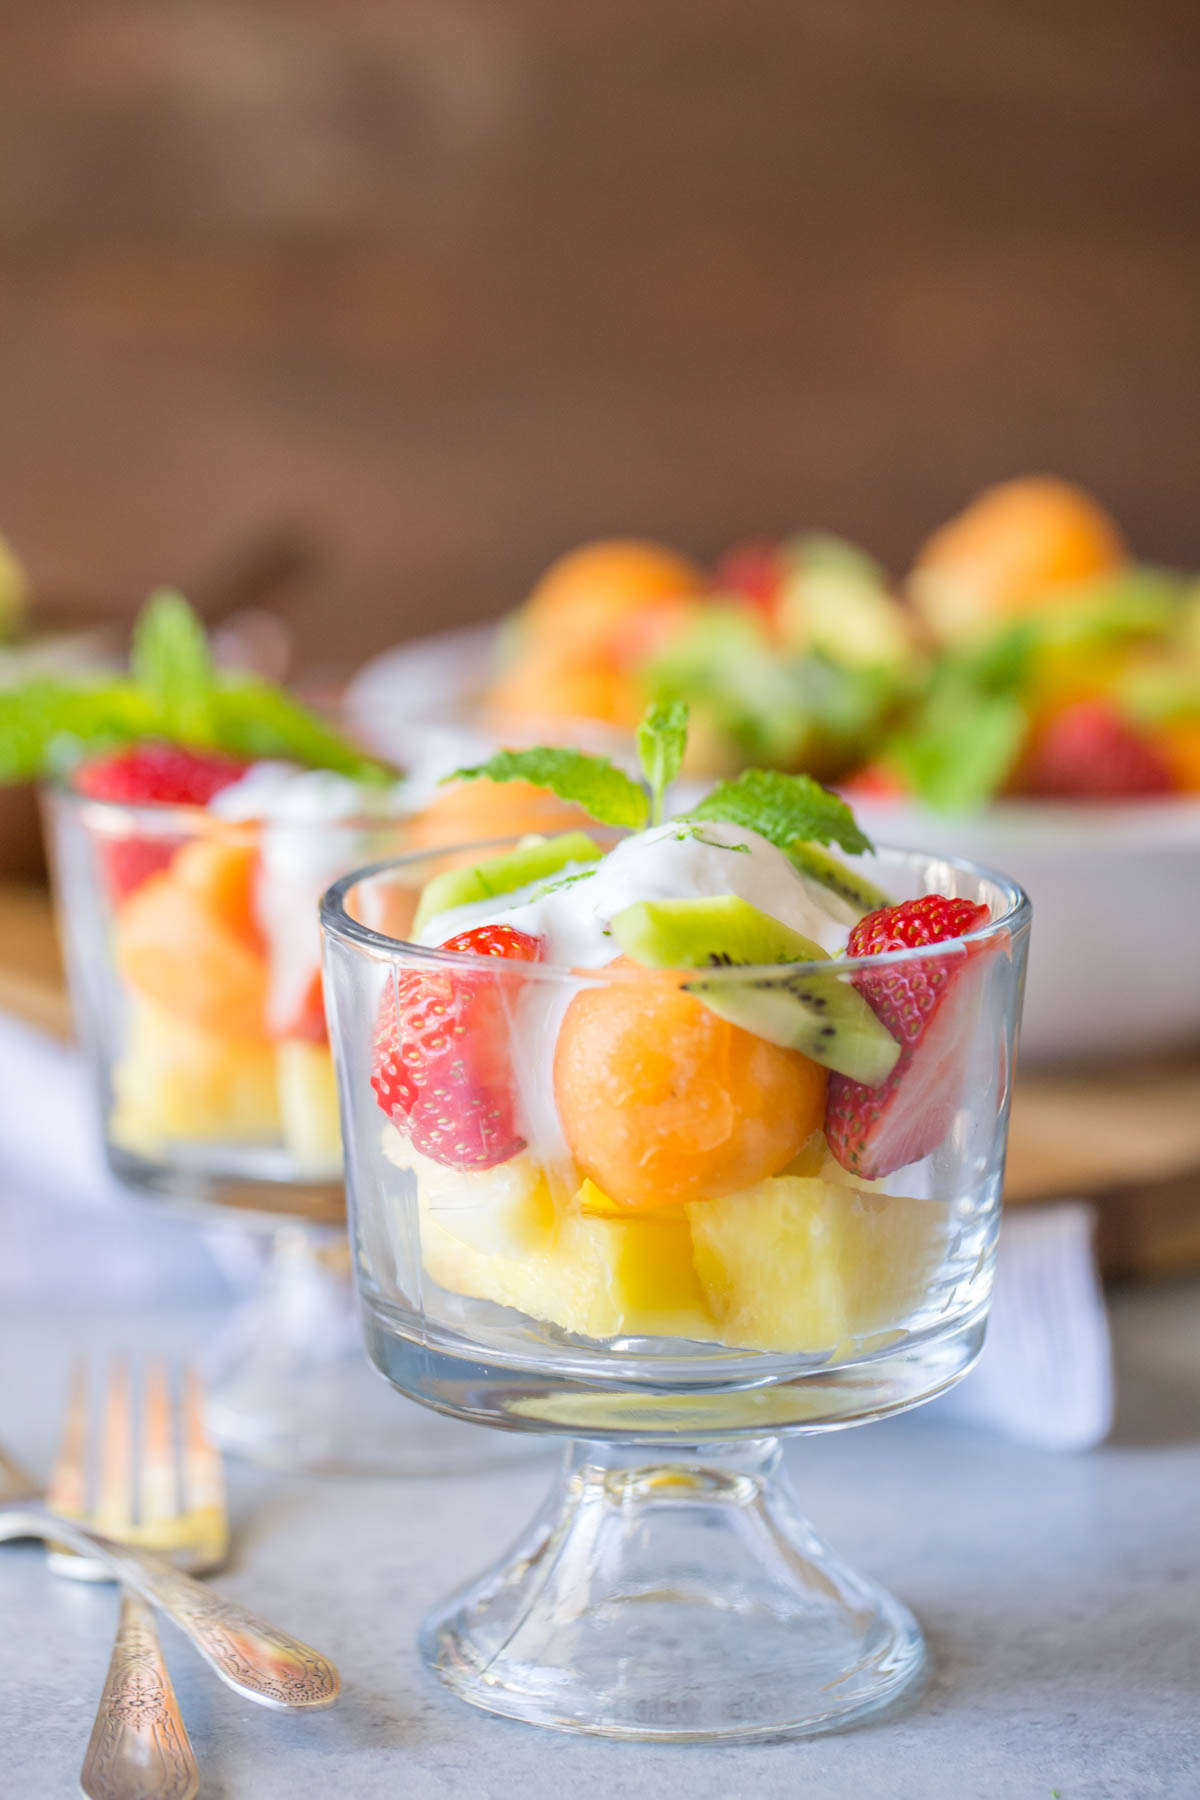 Summer Fruit Salad in a glass dish, topped with Coconut Lime Yogurt and mint leaves.  